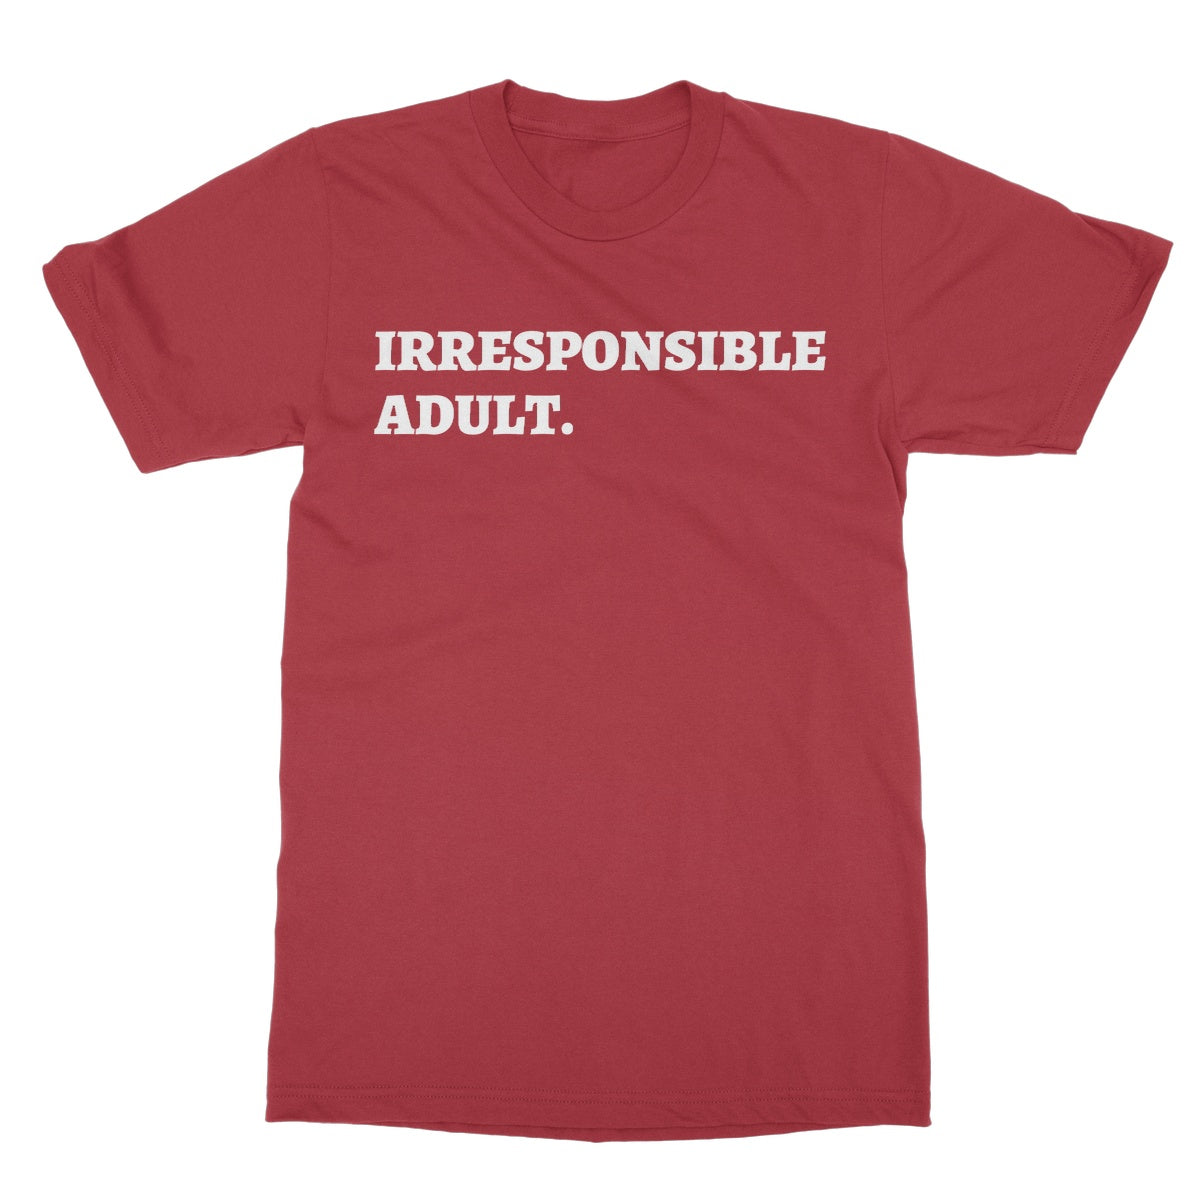 irresponsible adult t shirt red